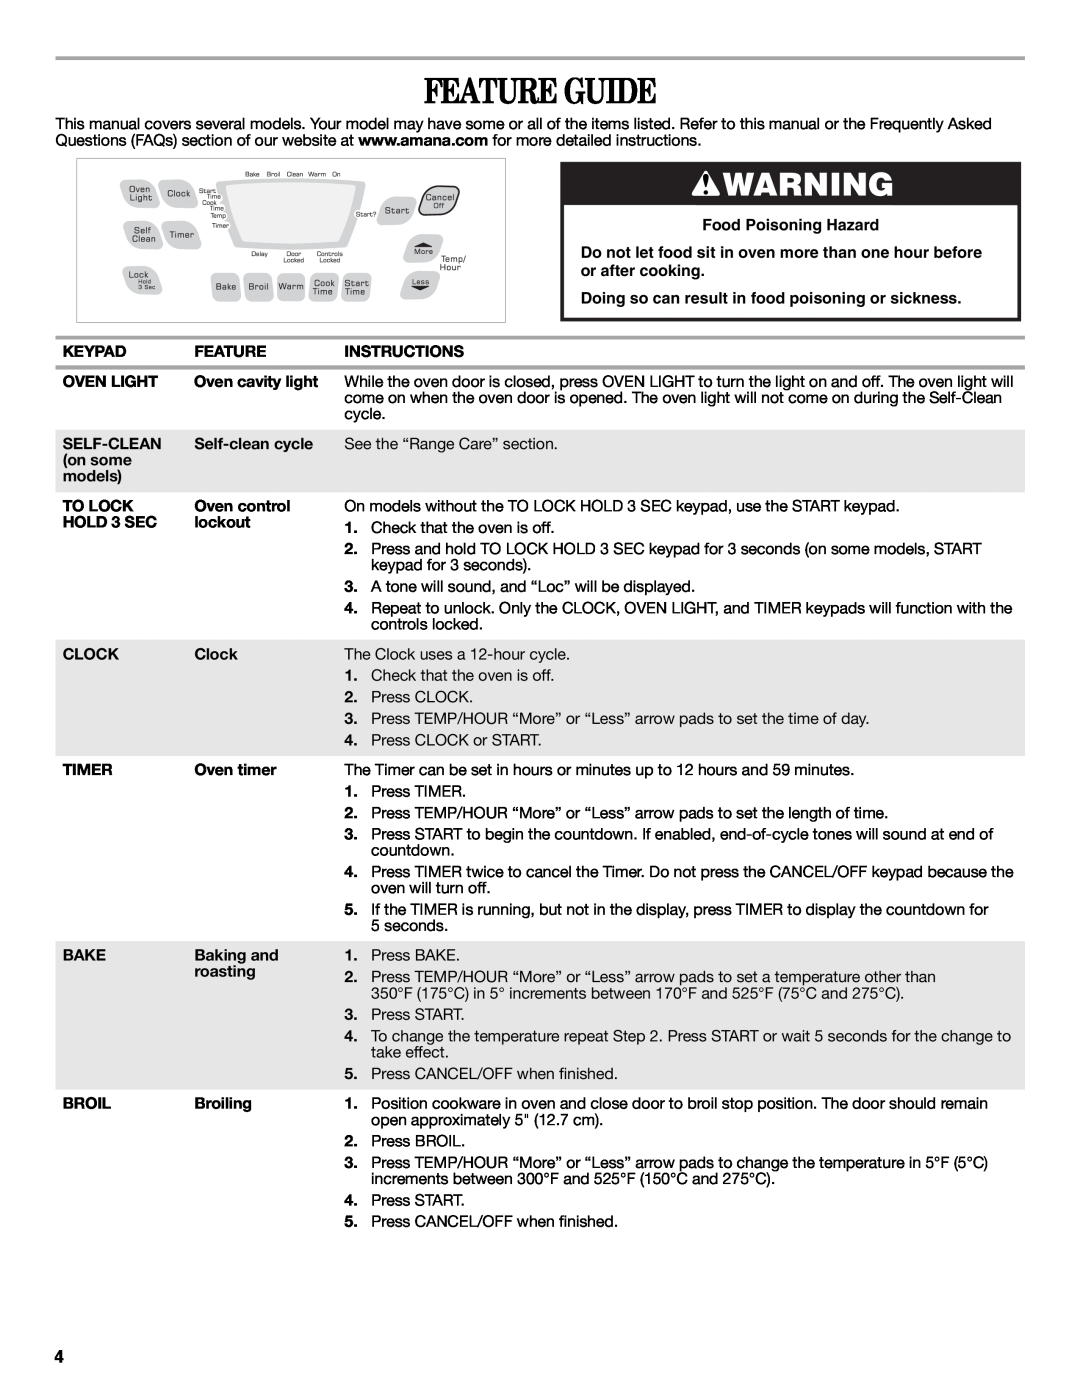 Amana W10419394A warranty Feature Guide, Food Poisoning Hazard, Do not let food sit in oven more than one hour before 